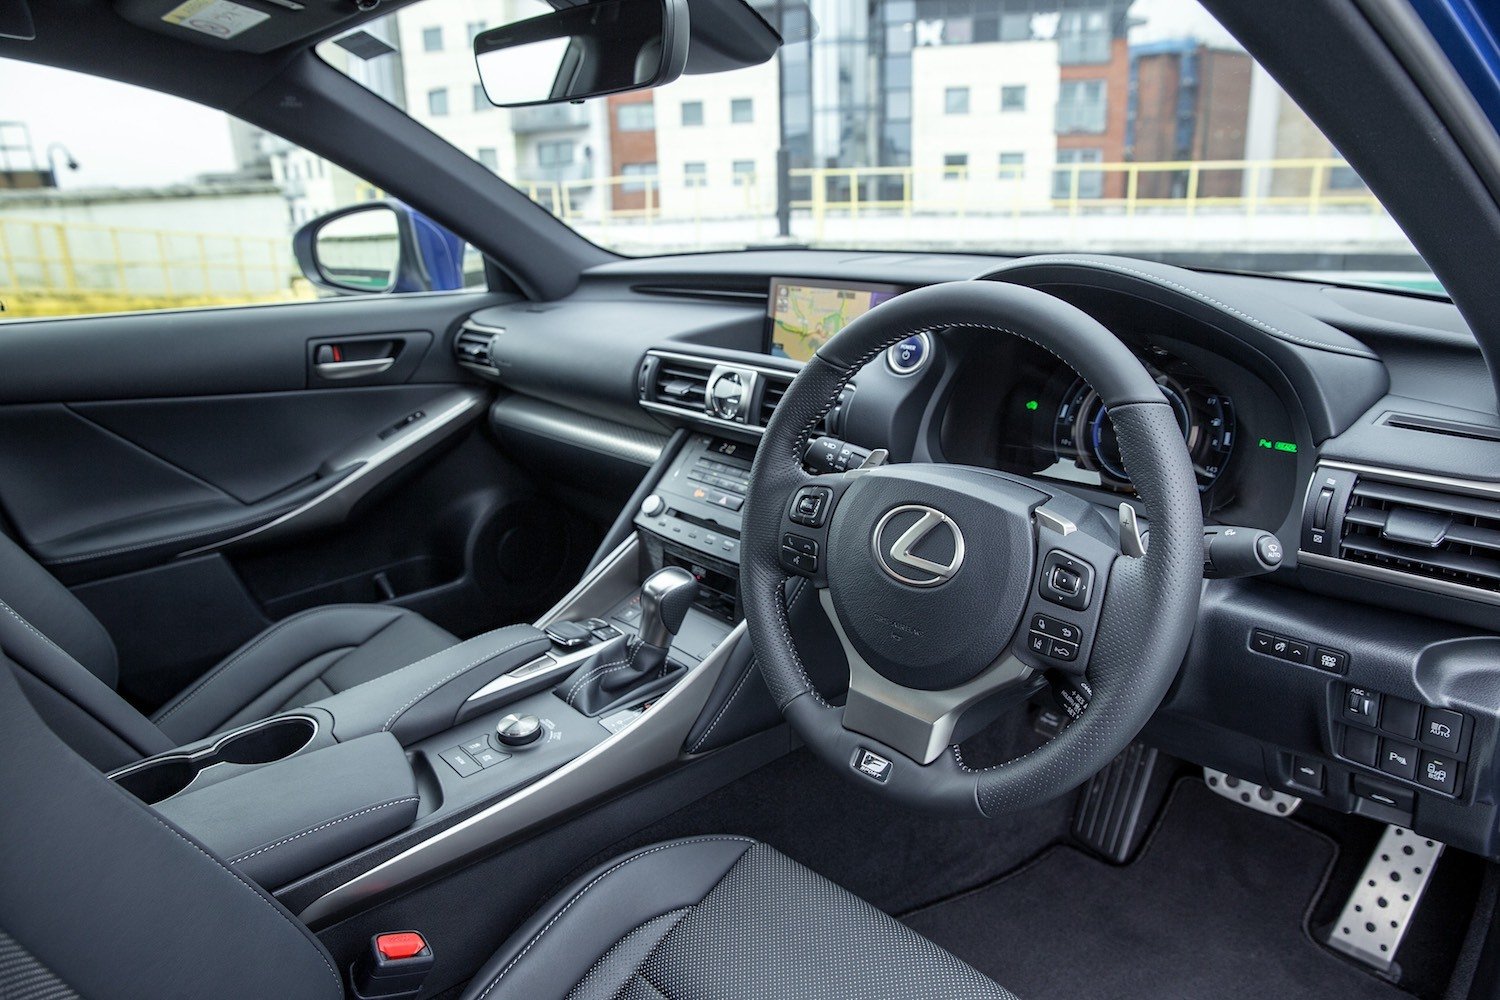 Neil Lyndon reviews the Lexus IS300h for Drive 14